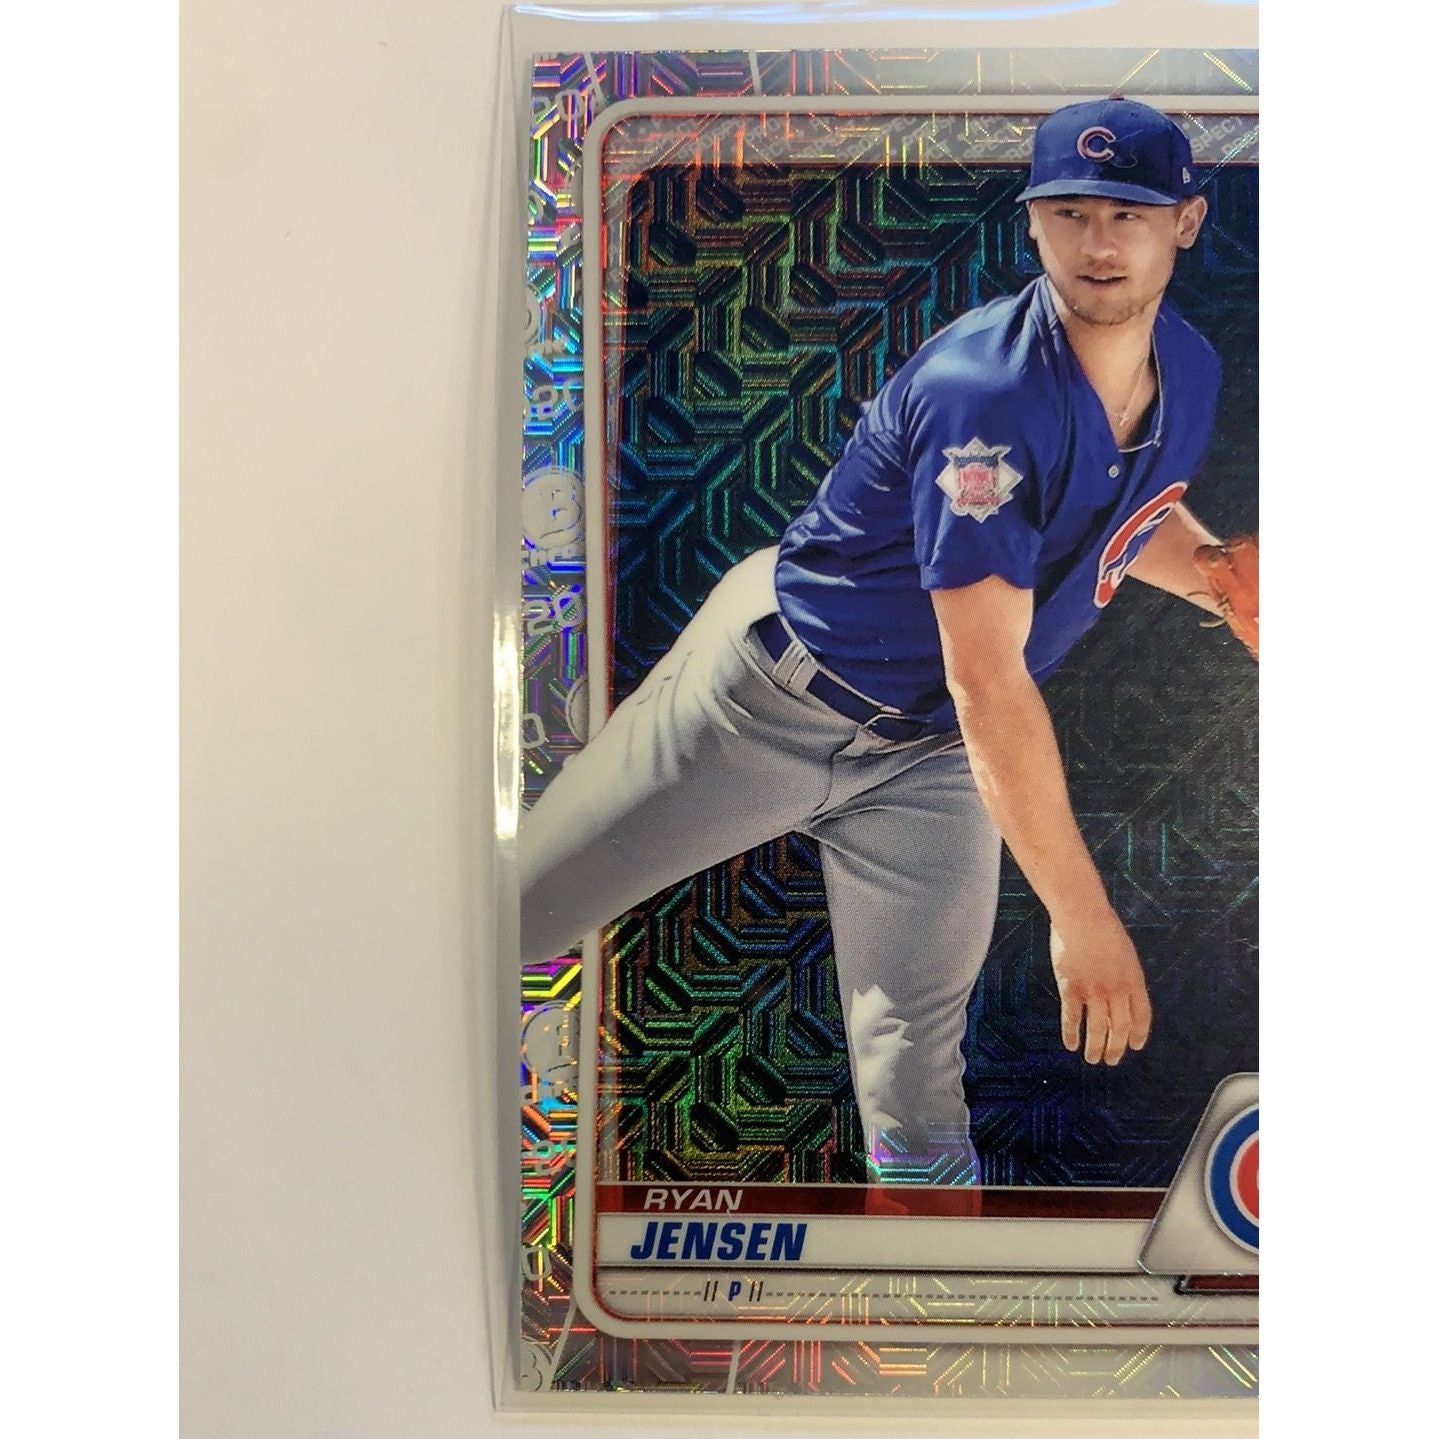  2020 Bowman Chrome Ryan Jensen Mojo Refractor  Local Legends Cards & Collectibles